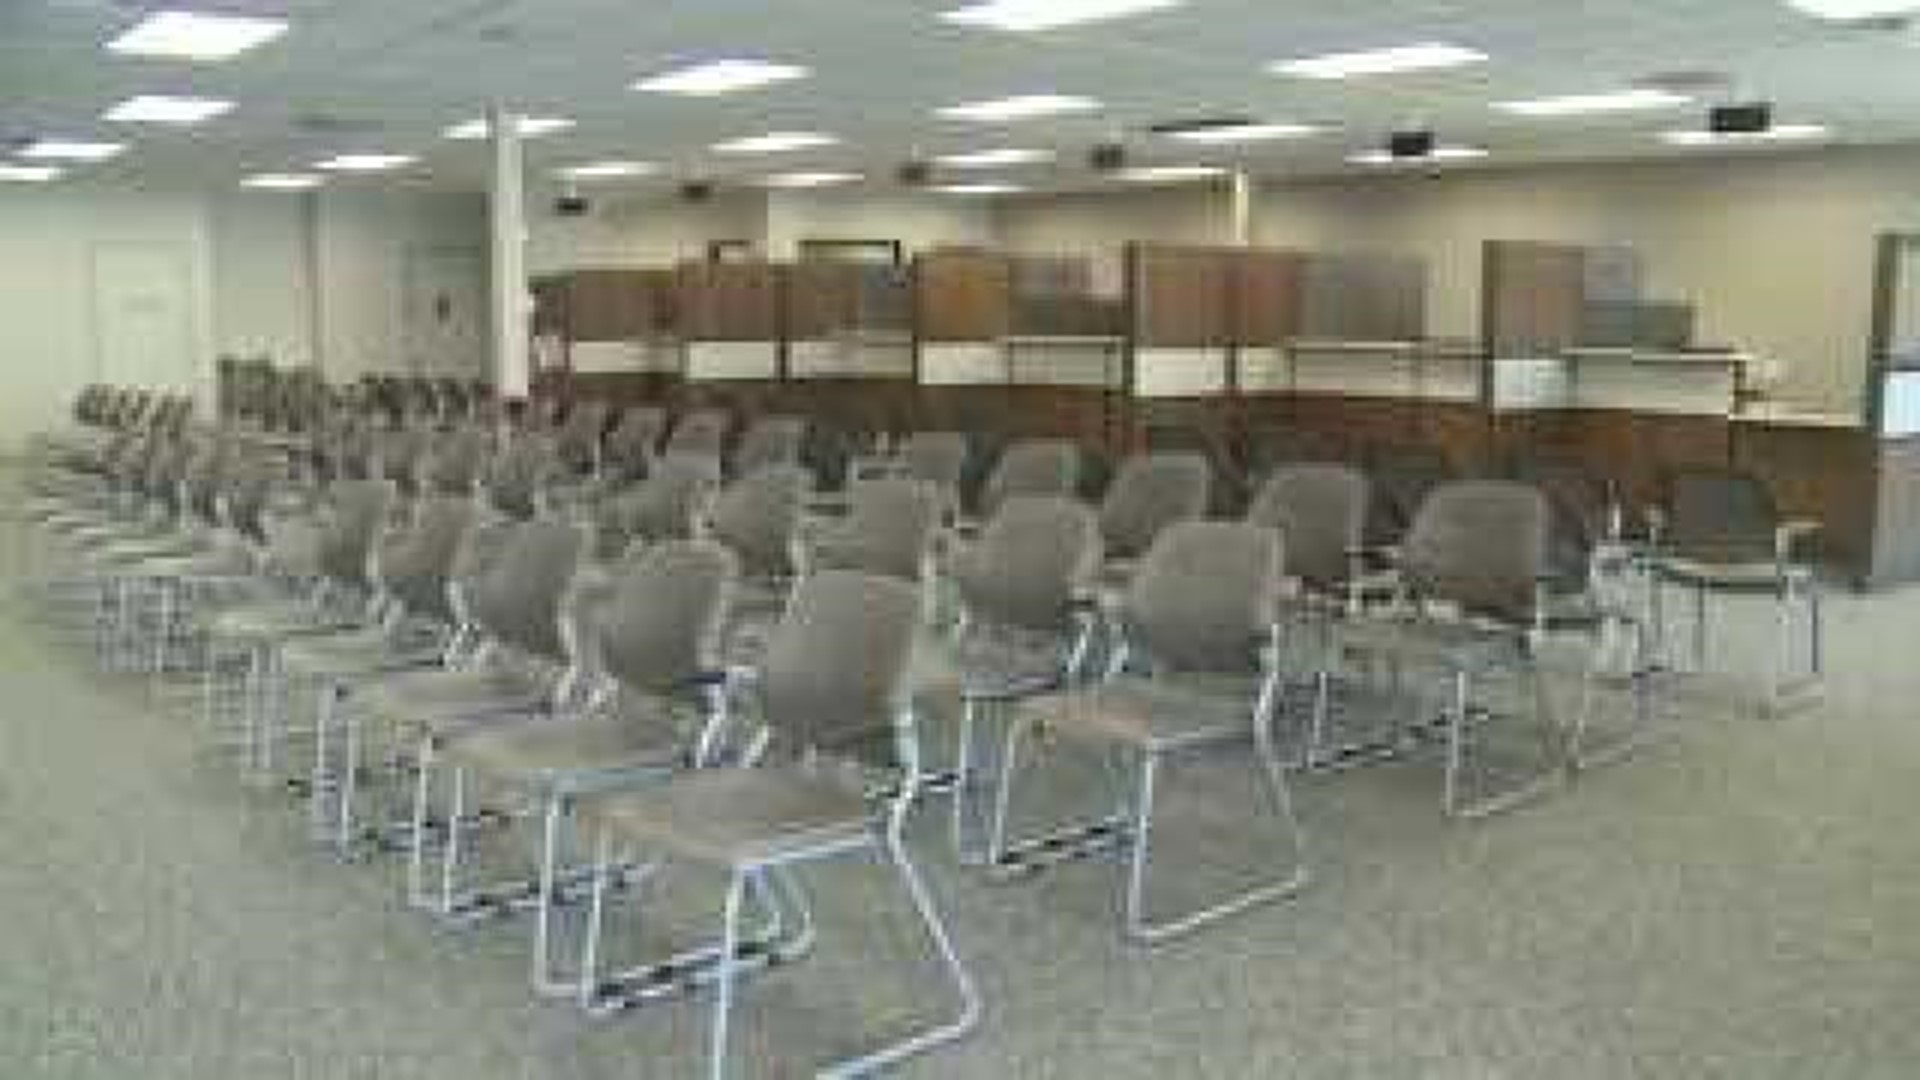 Davenport Drivers License facility expands to new location